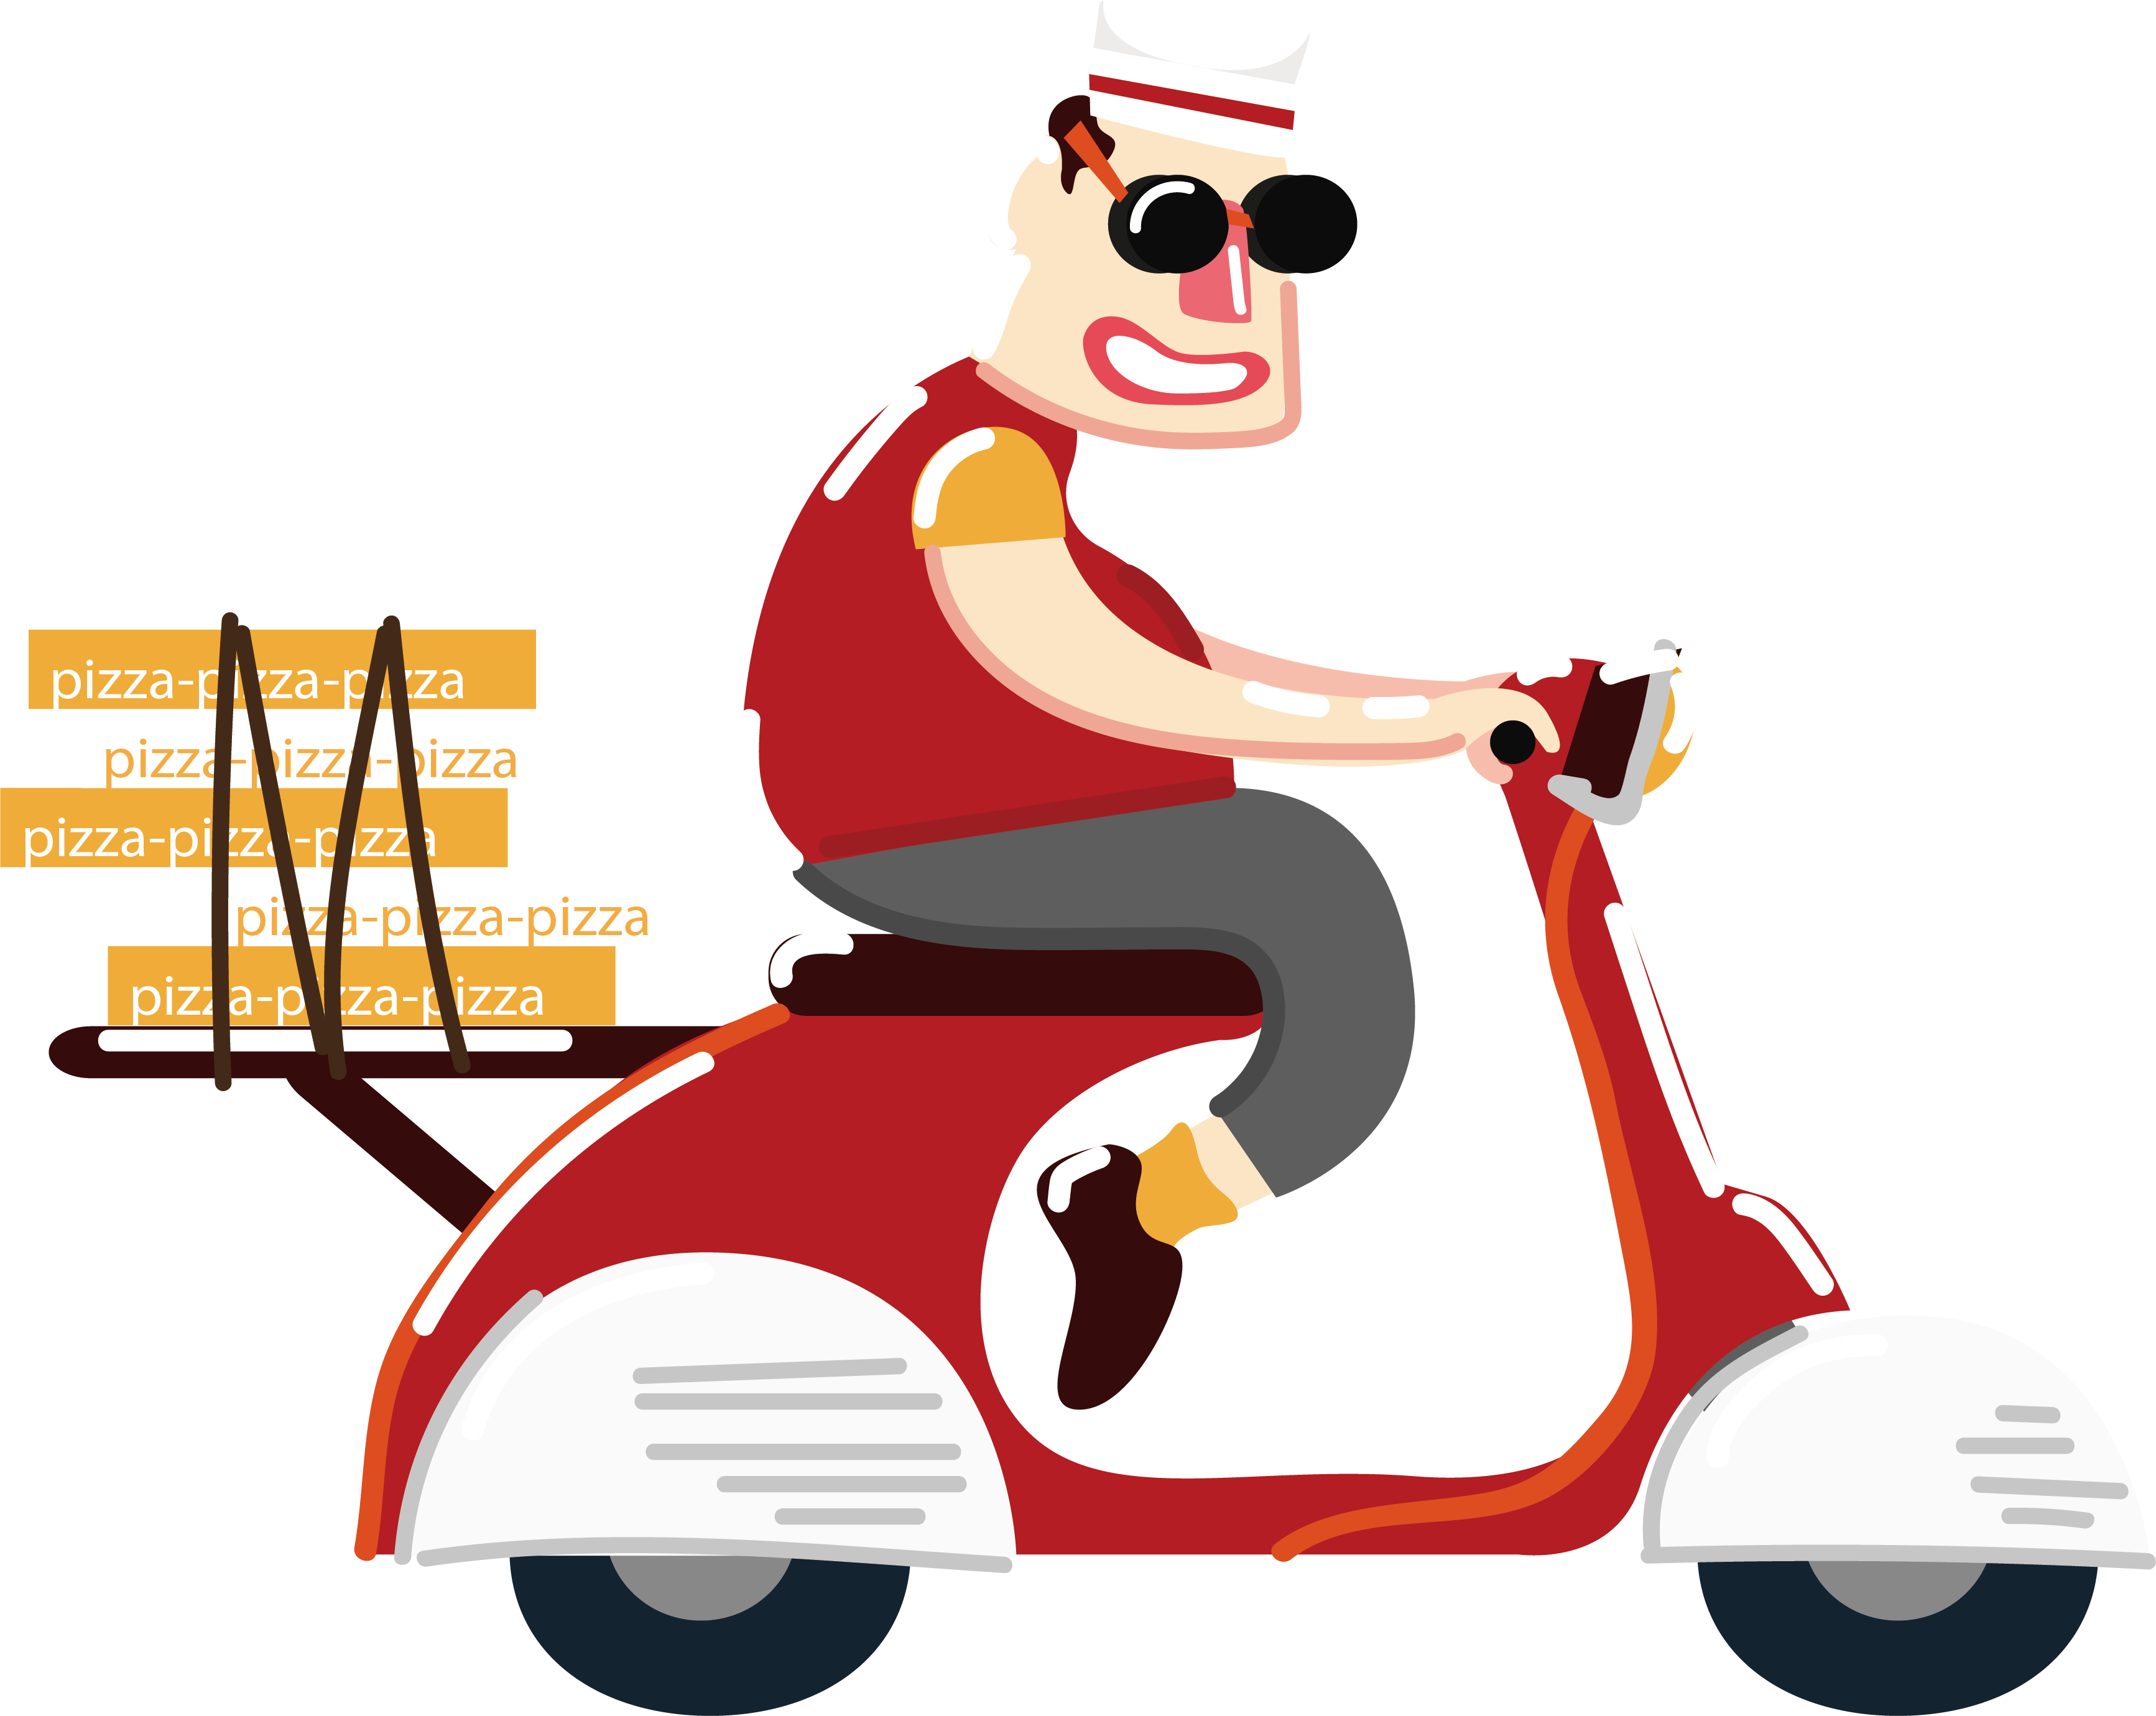 Pizza fast food motorcycle. Scooter clipart delivery scooter